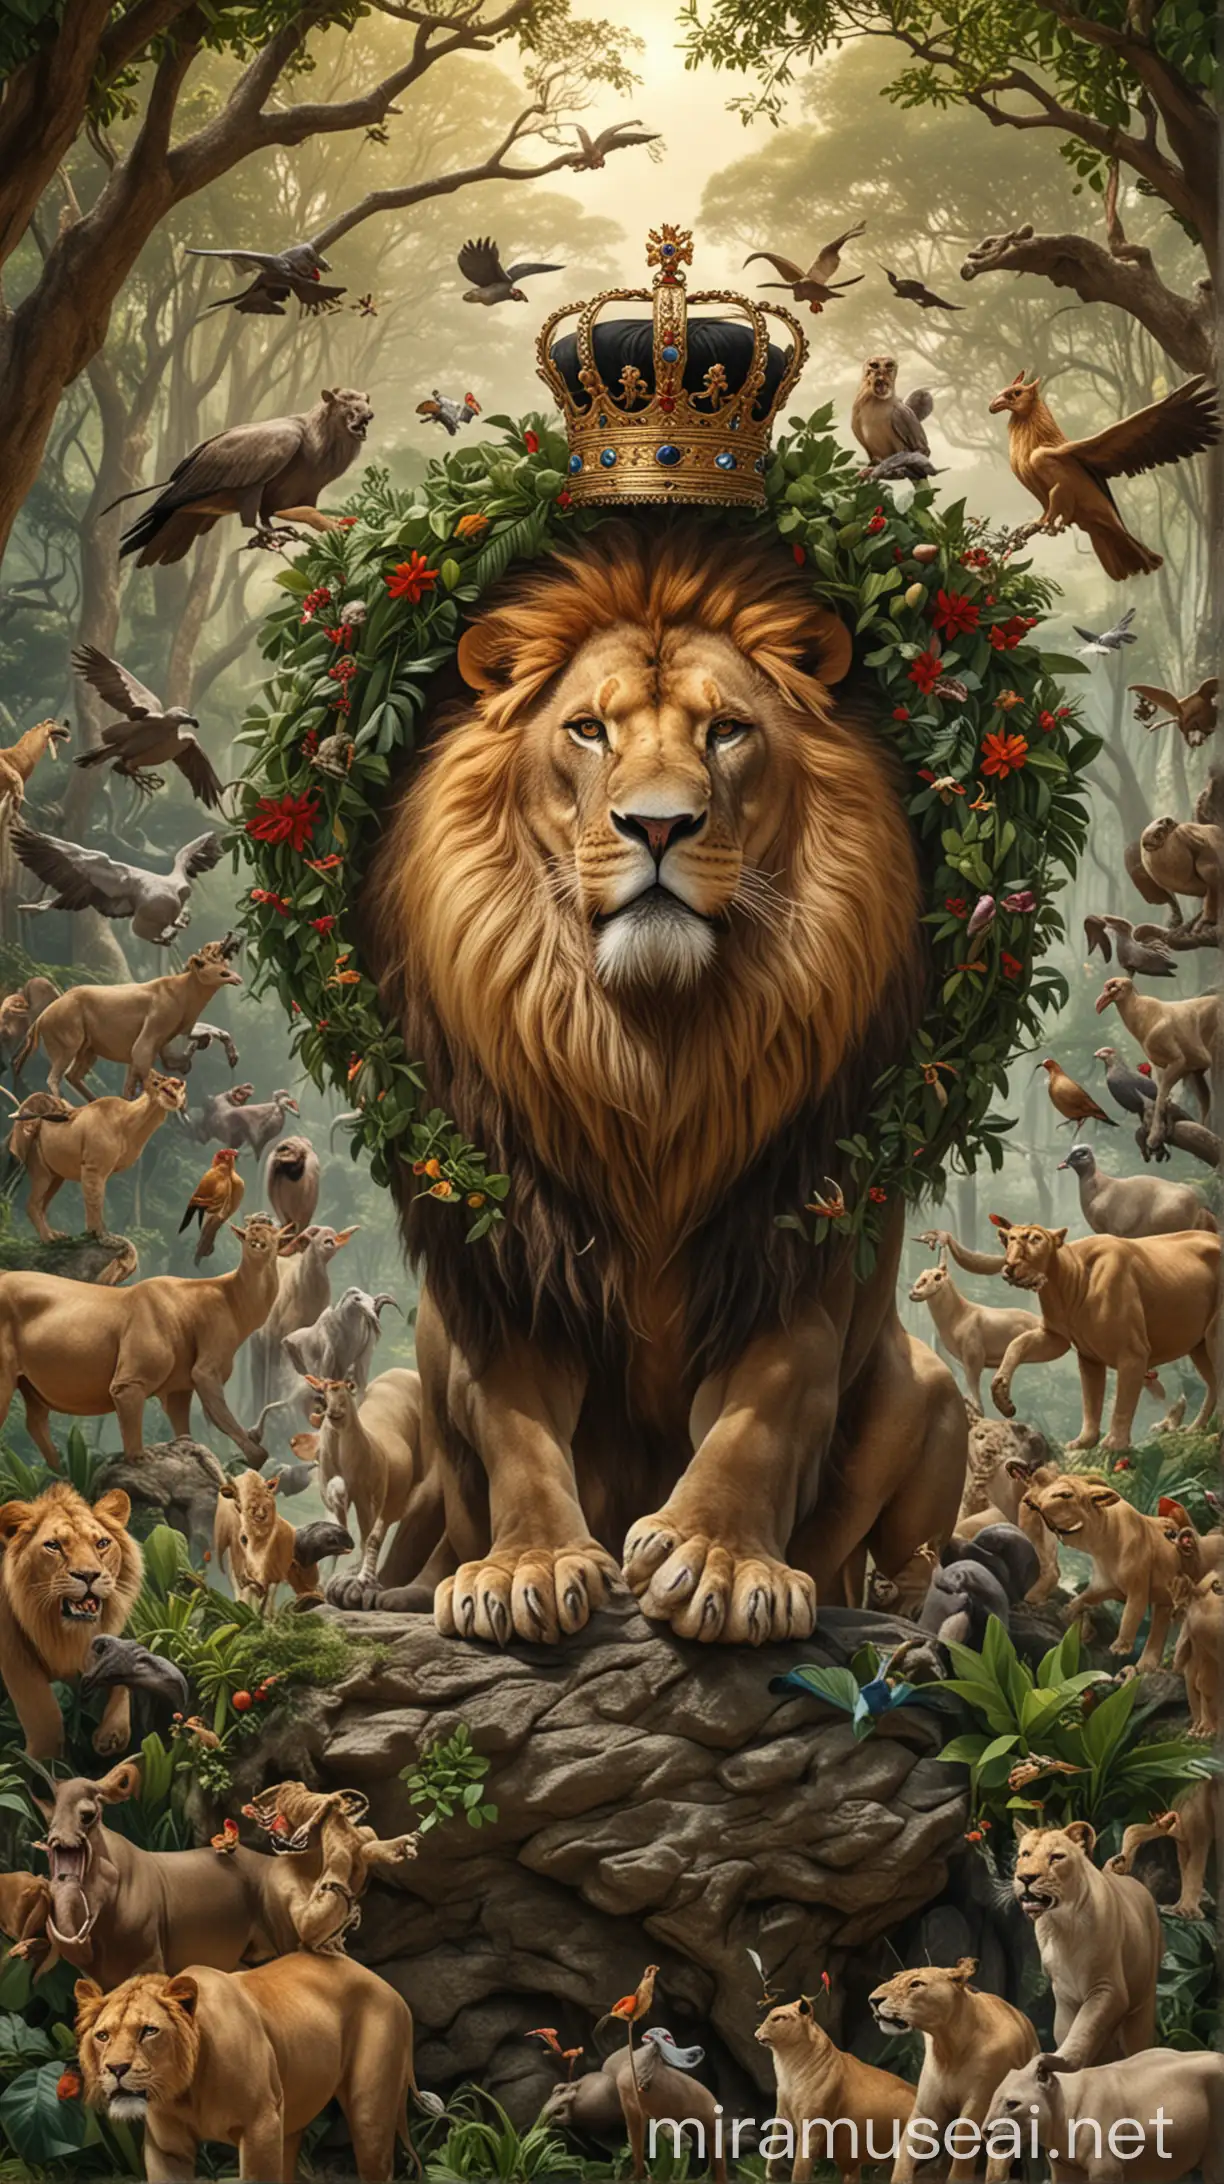 Royal Lion Roaring Amidst Tropical Forest Animals Paying Homage